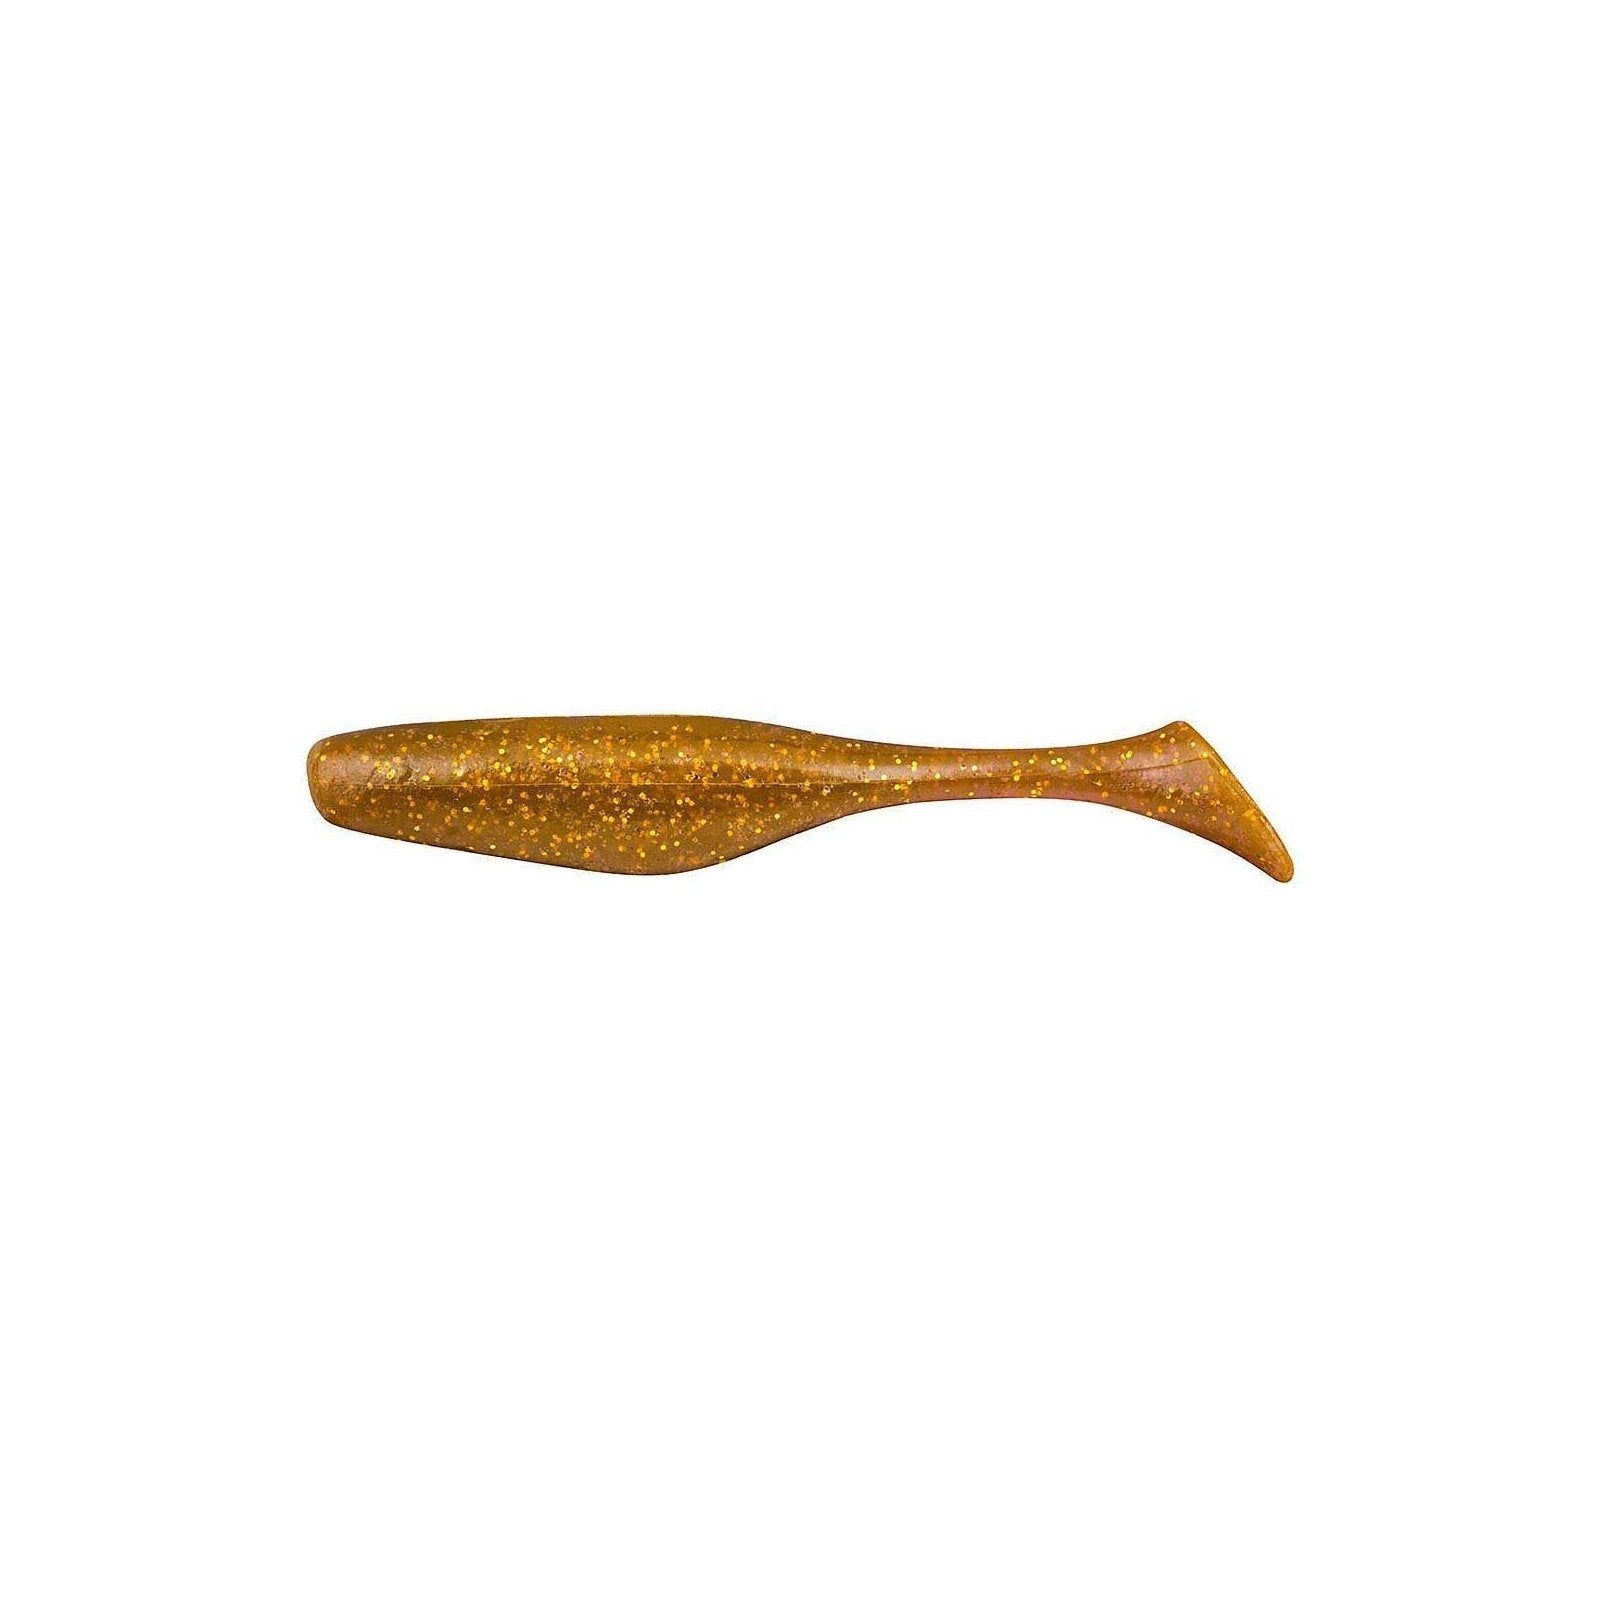 Select Fishing Crazy Shad Gummifisch 999